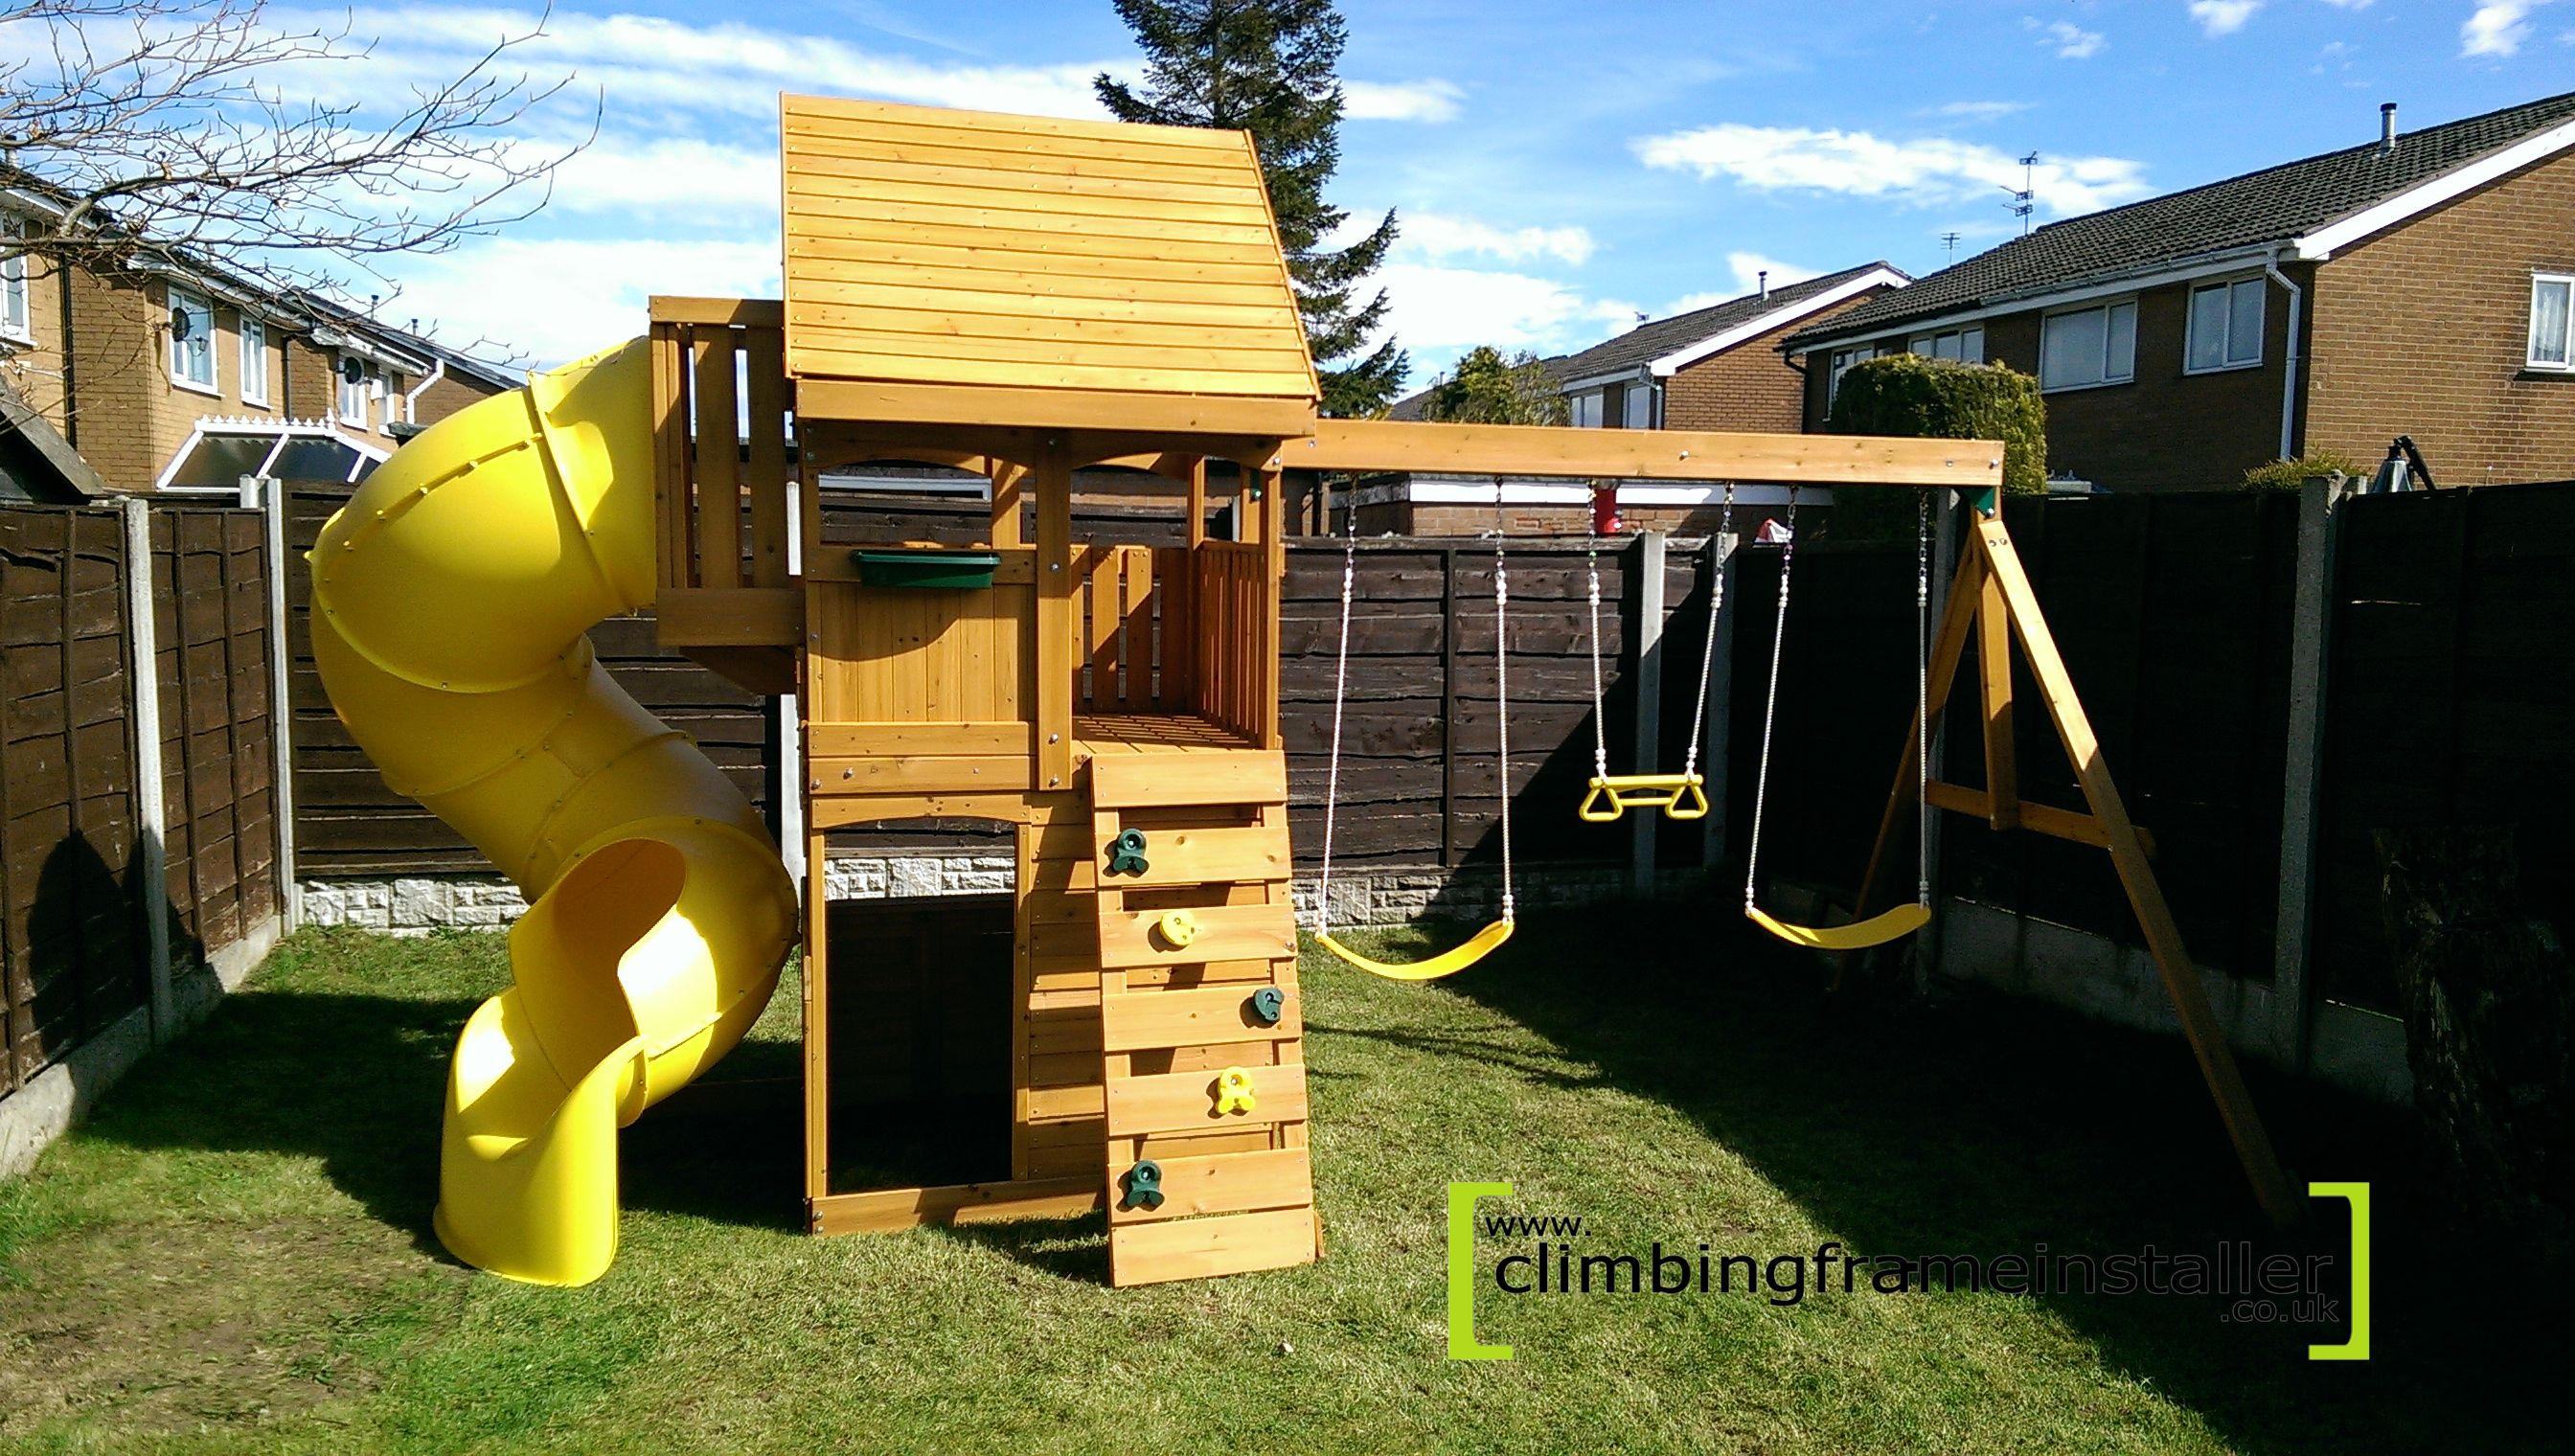 The Selwood Grandview Climbing Frame with Tube Slide